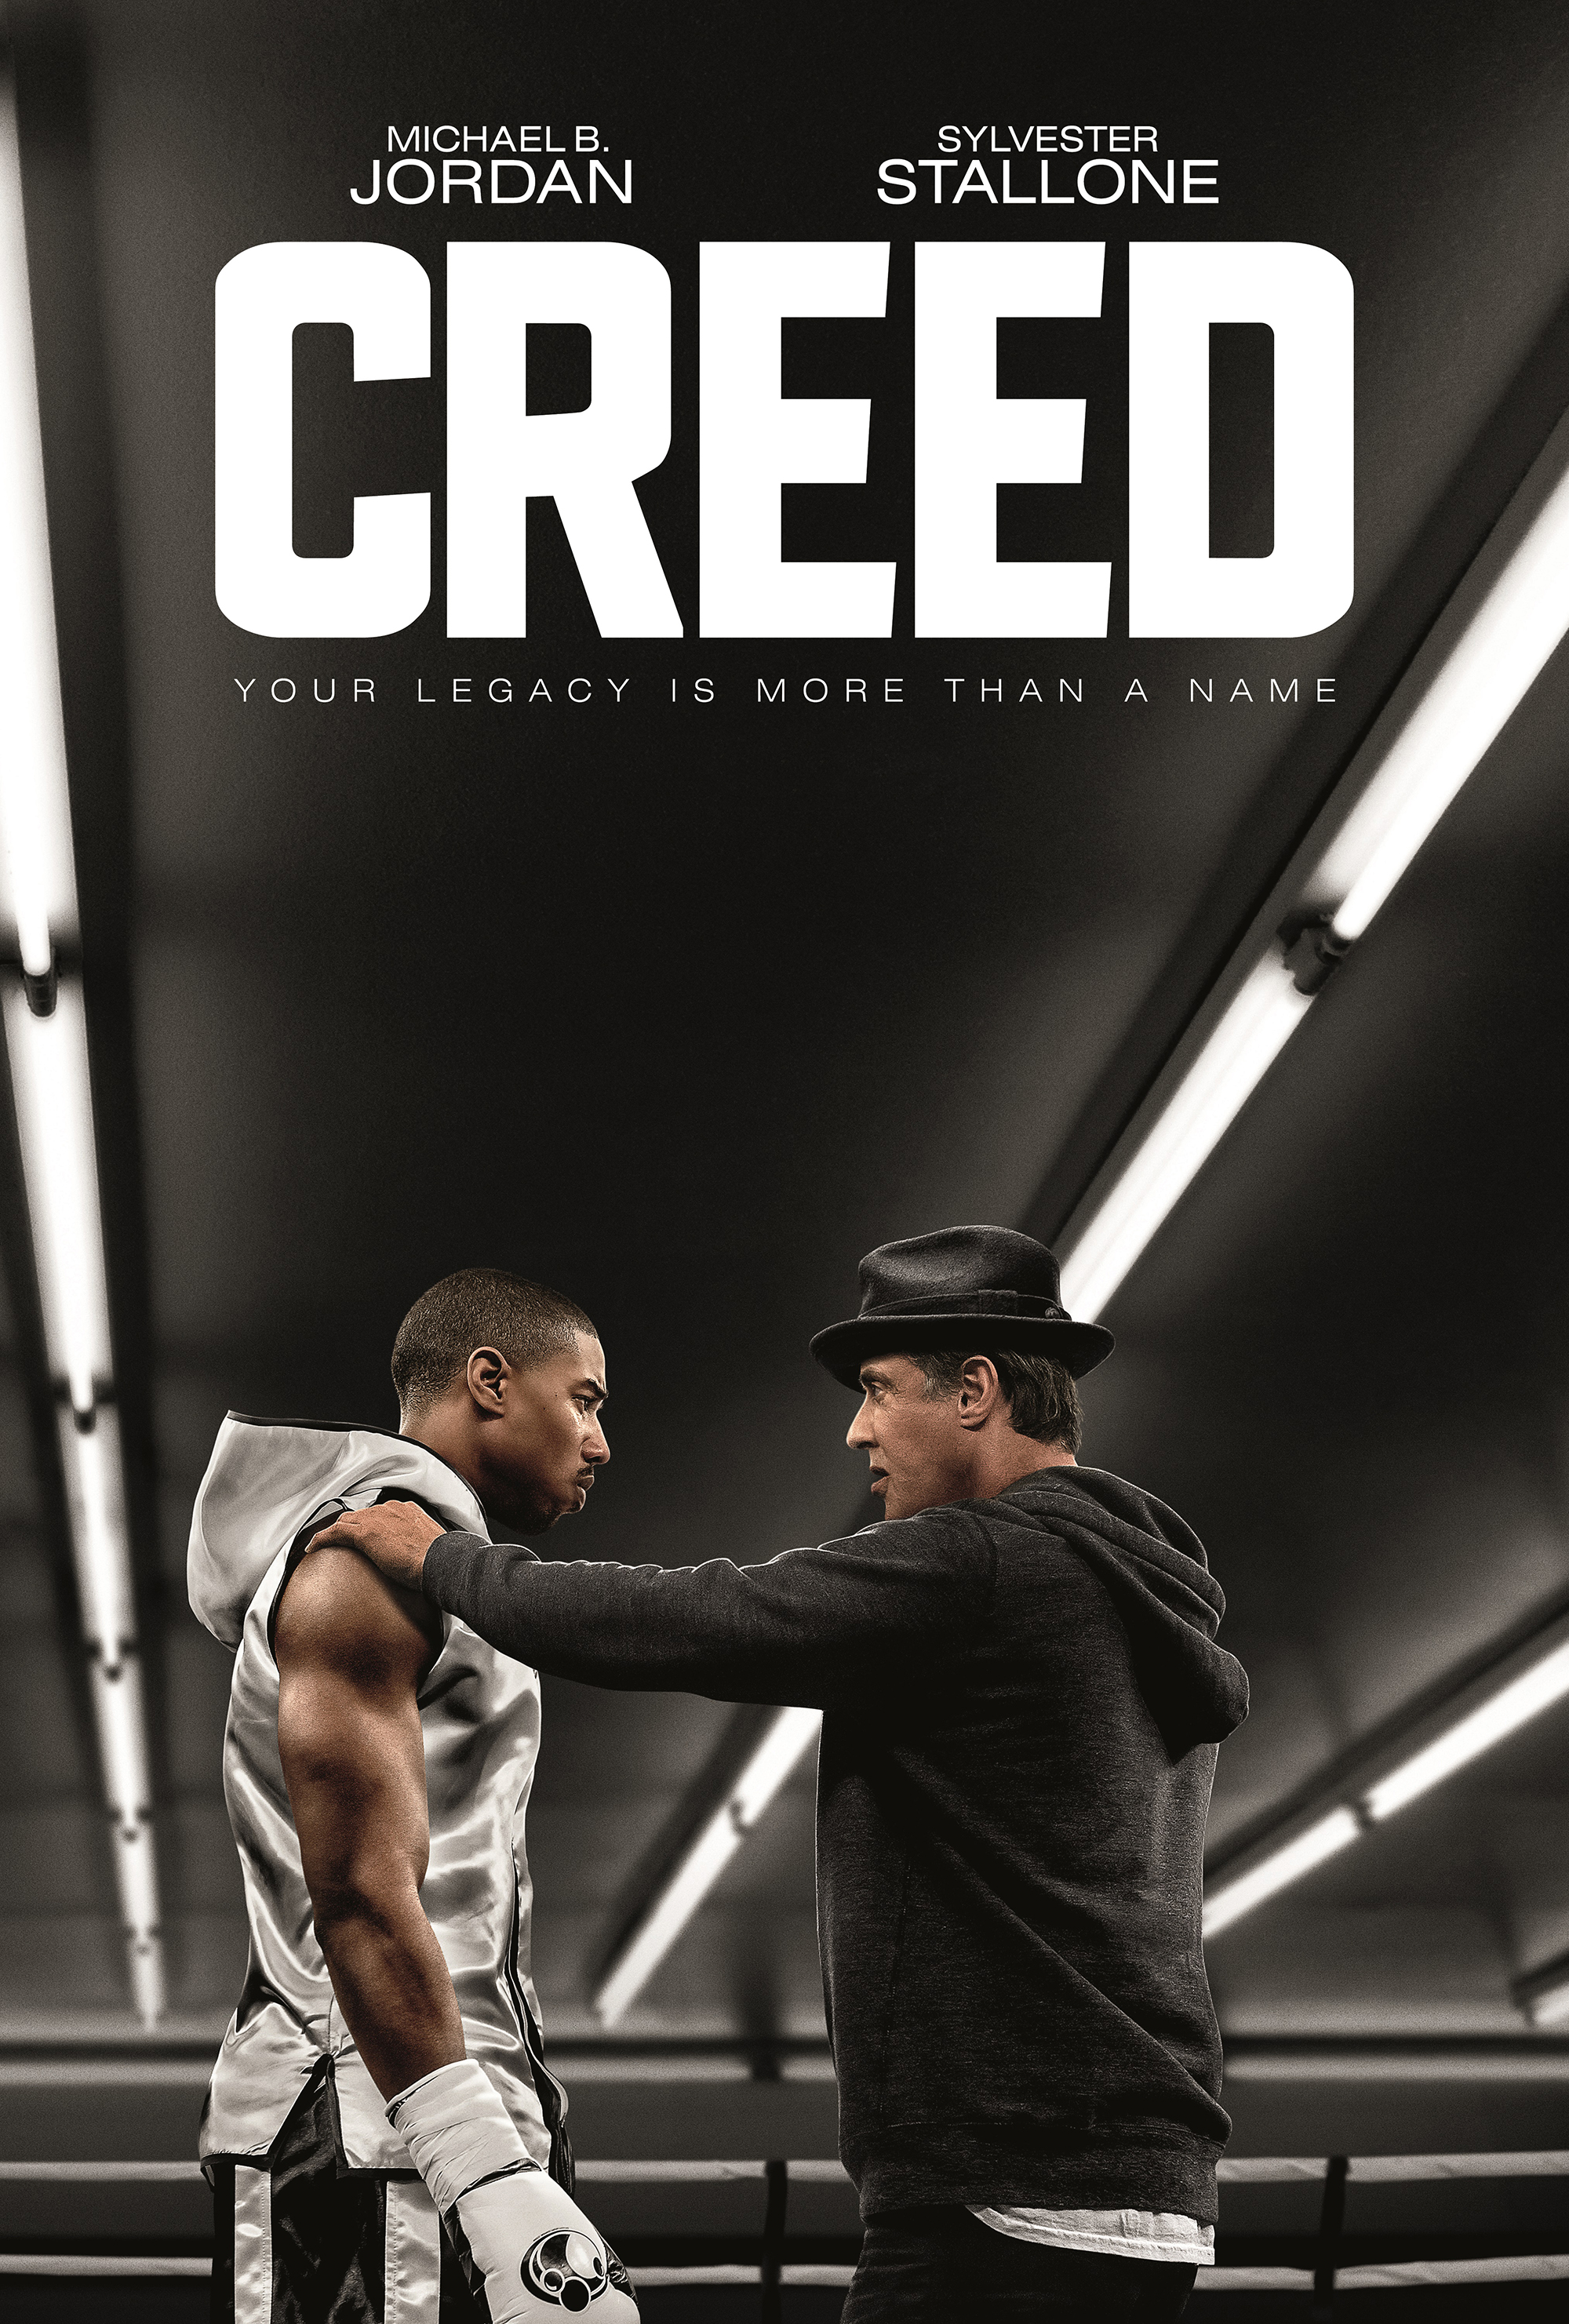 Creed - Where to Watch and Stream